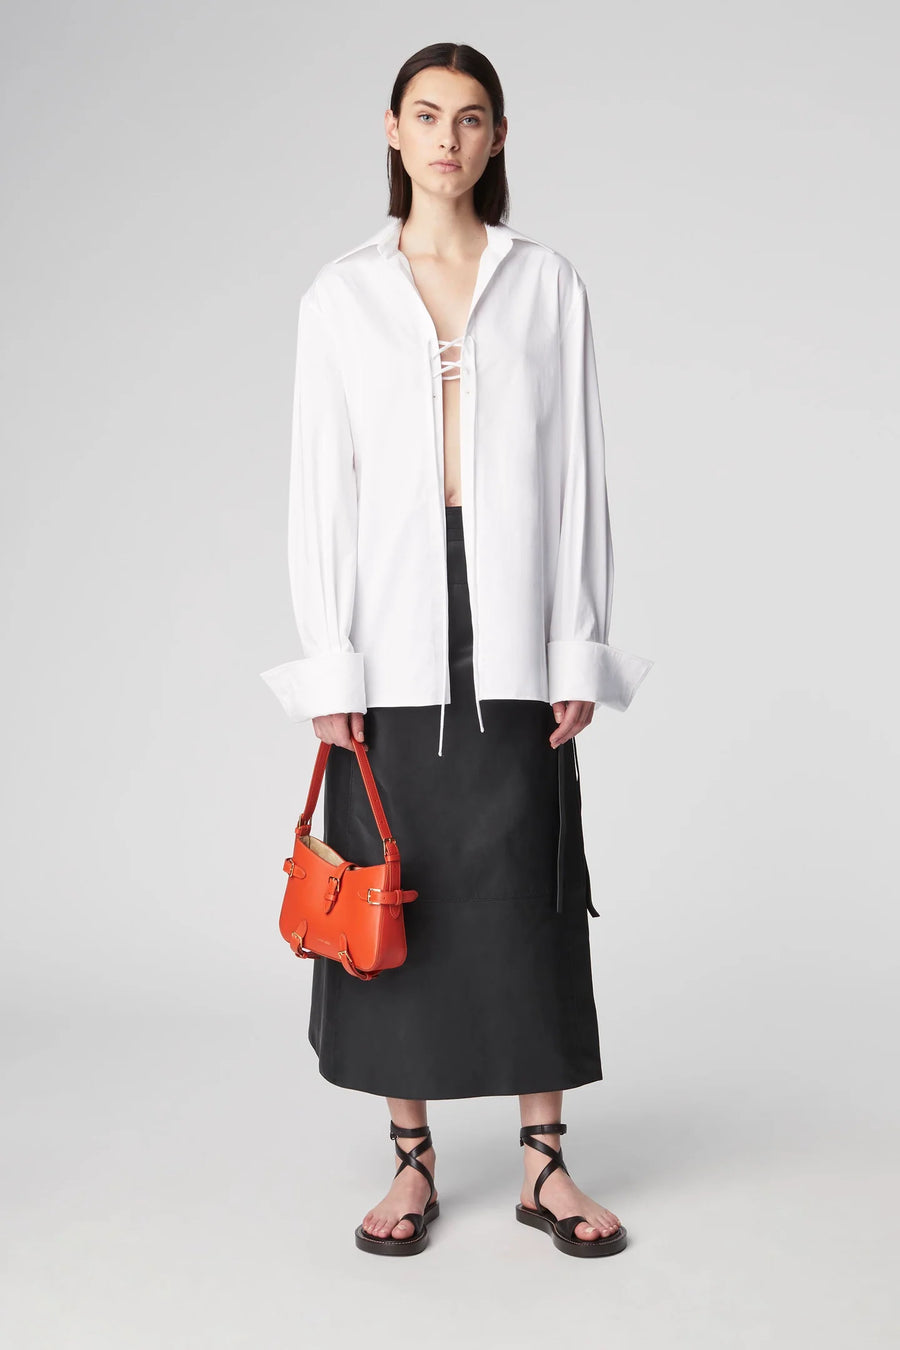 Oversized blouse featuring tie detailing at the chest and a wide collar. 